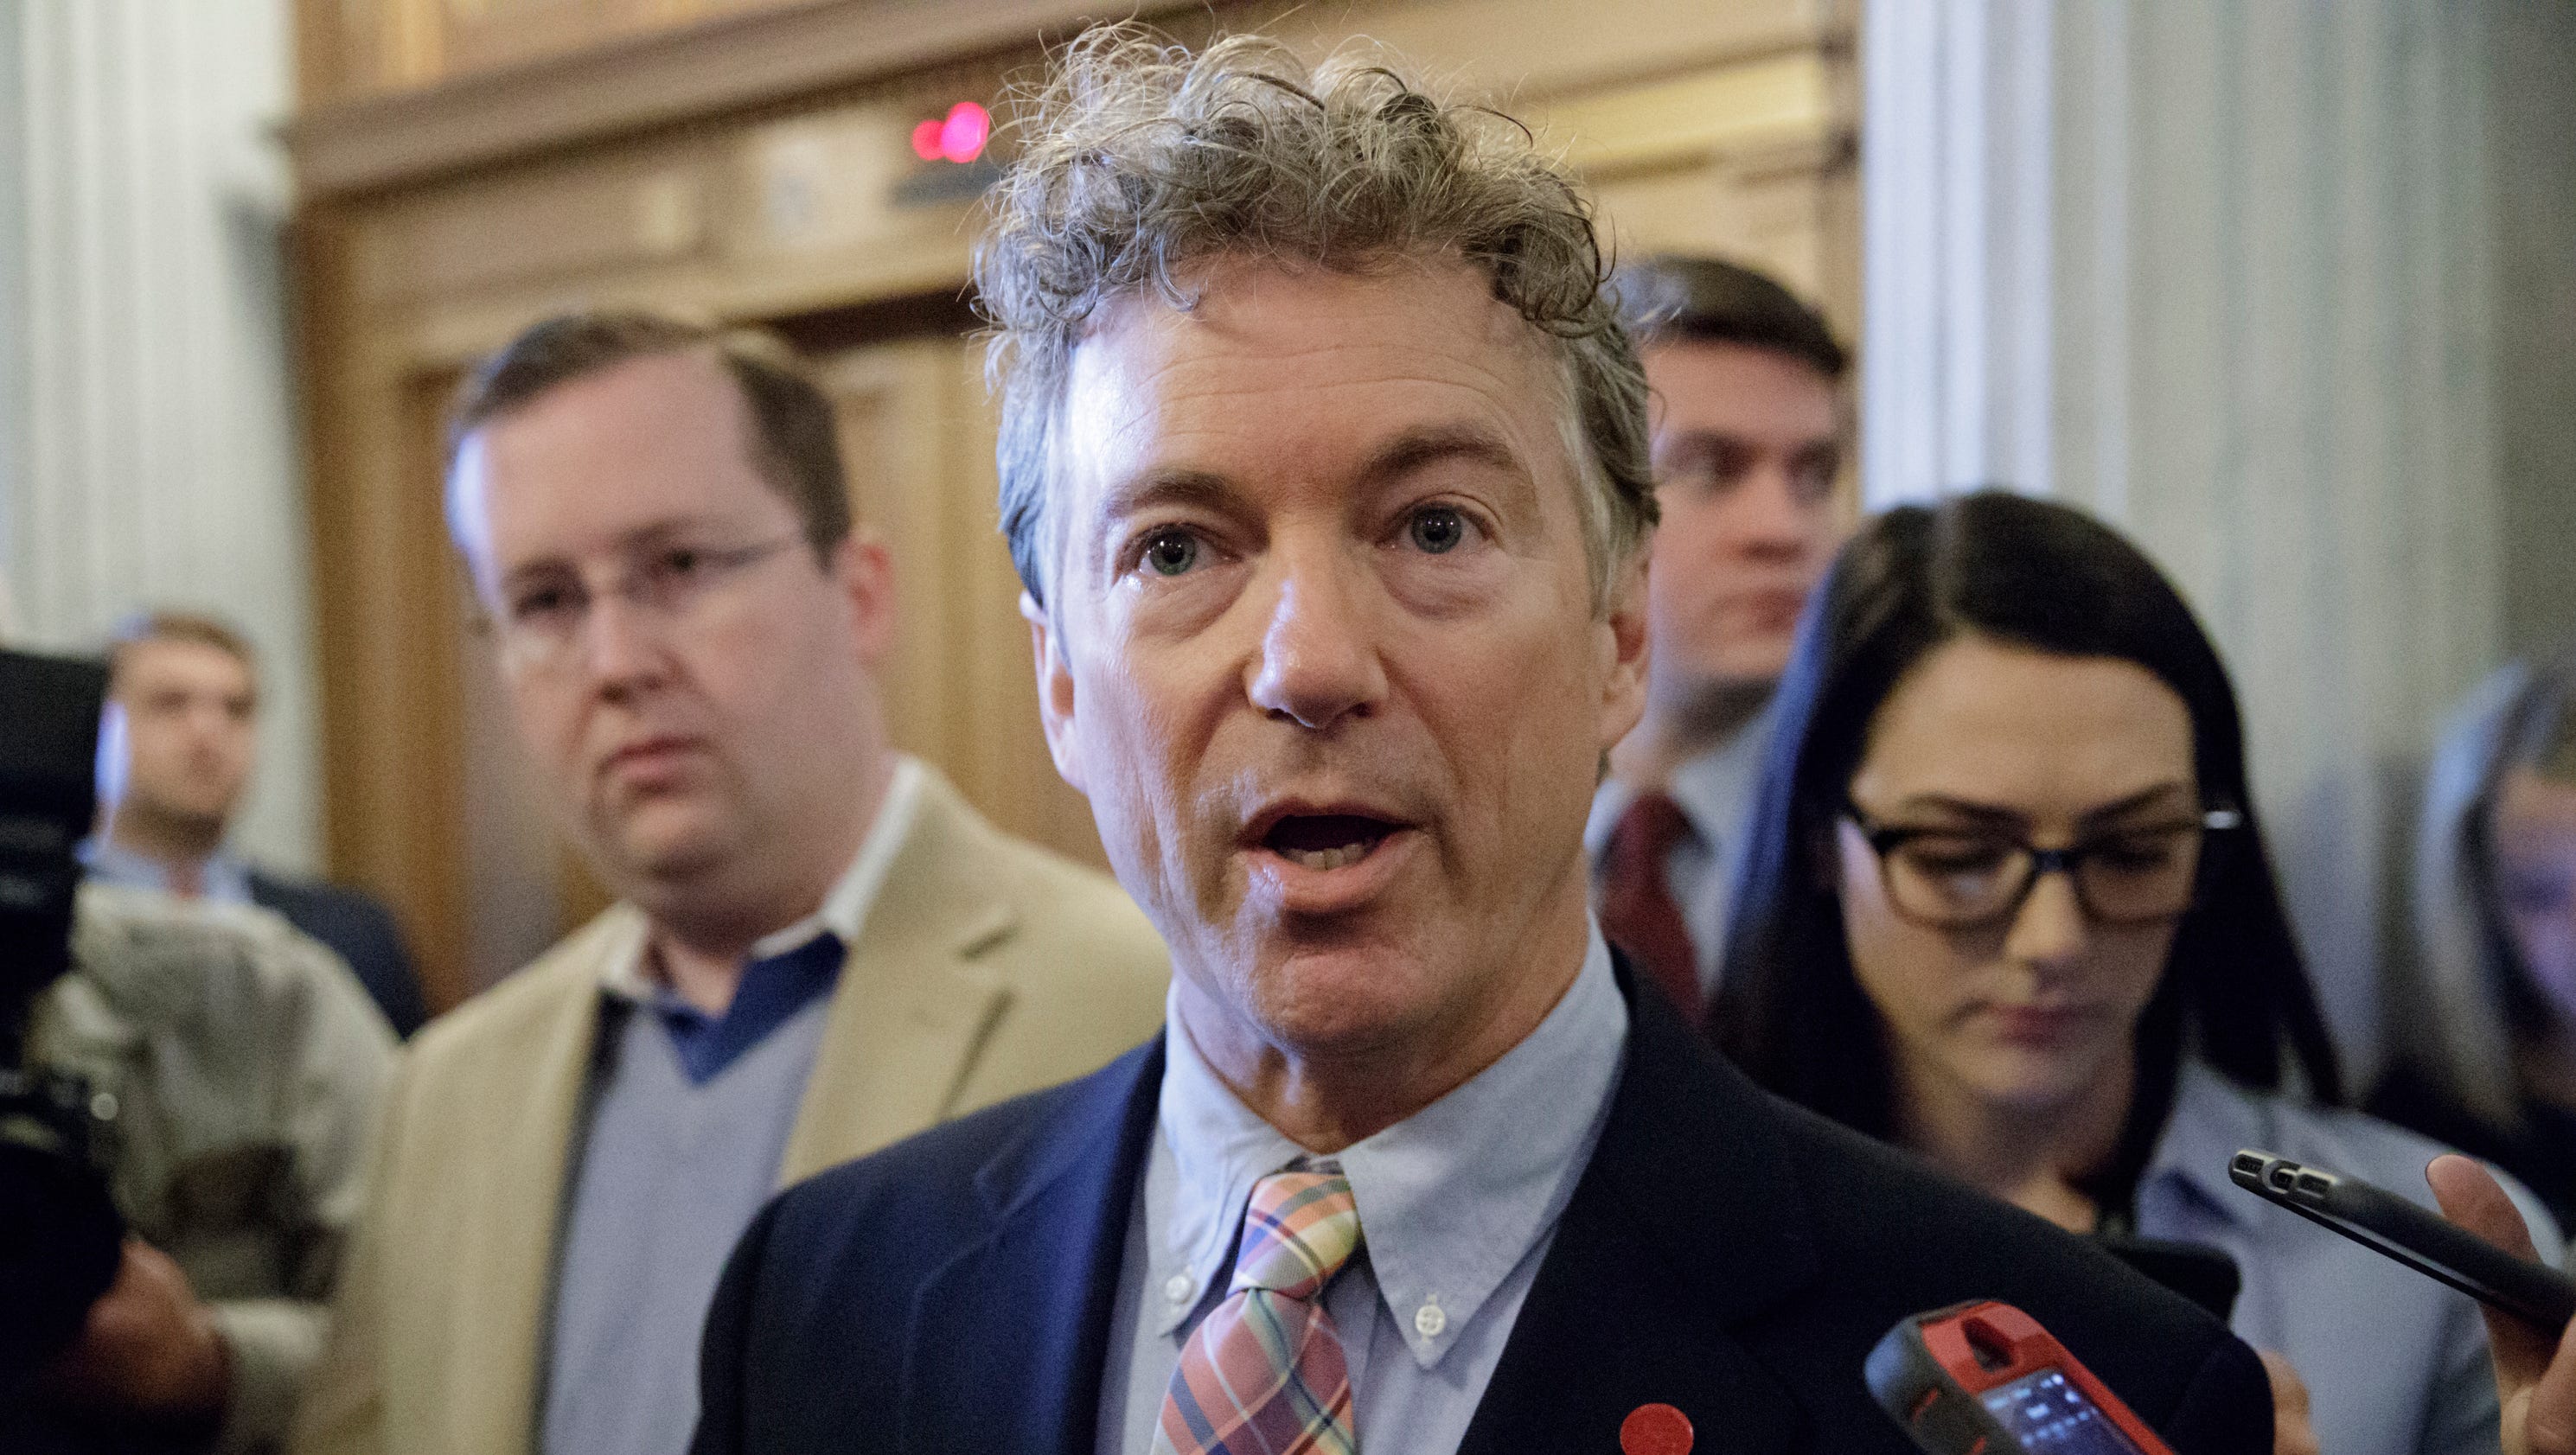 Sen. Rand Paul not an example of profile in courage| Aaron Kall - The Courier-Journal